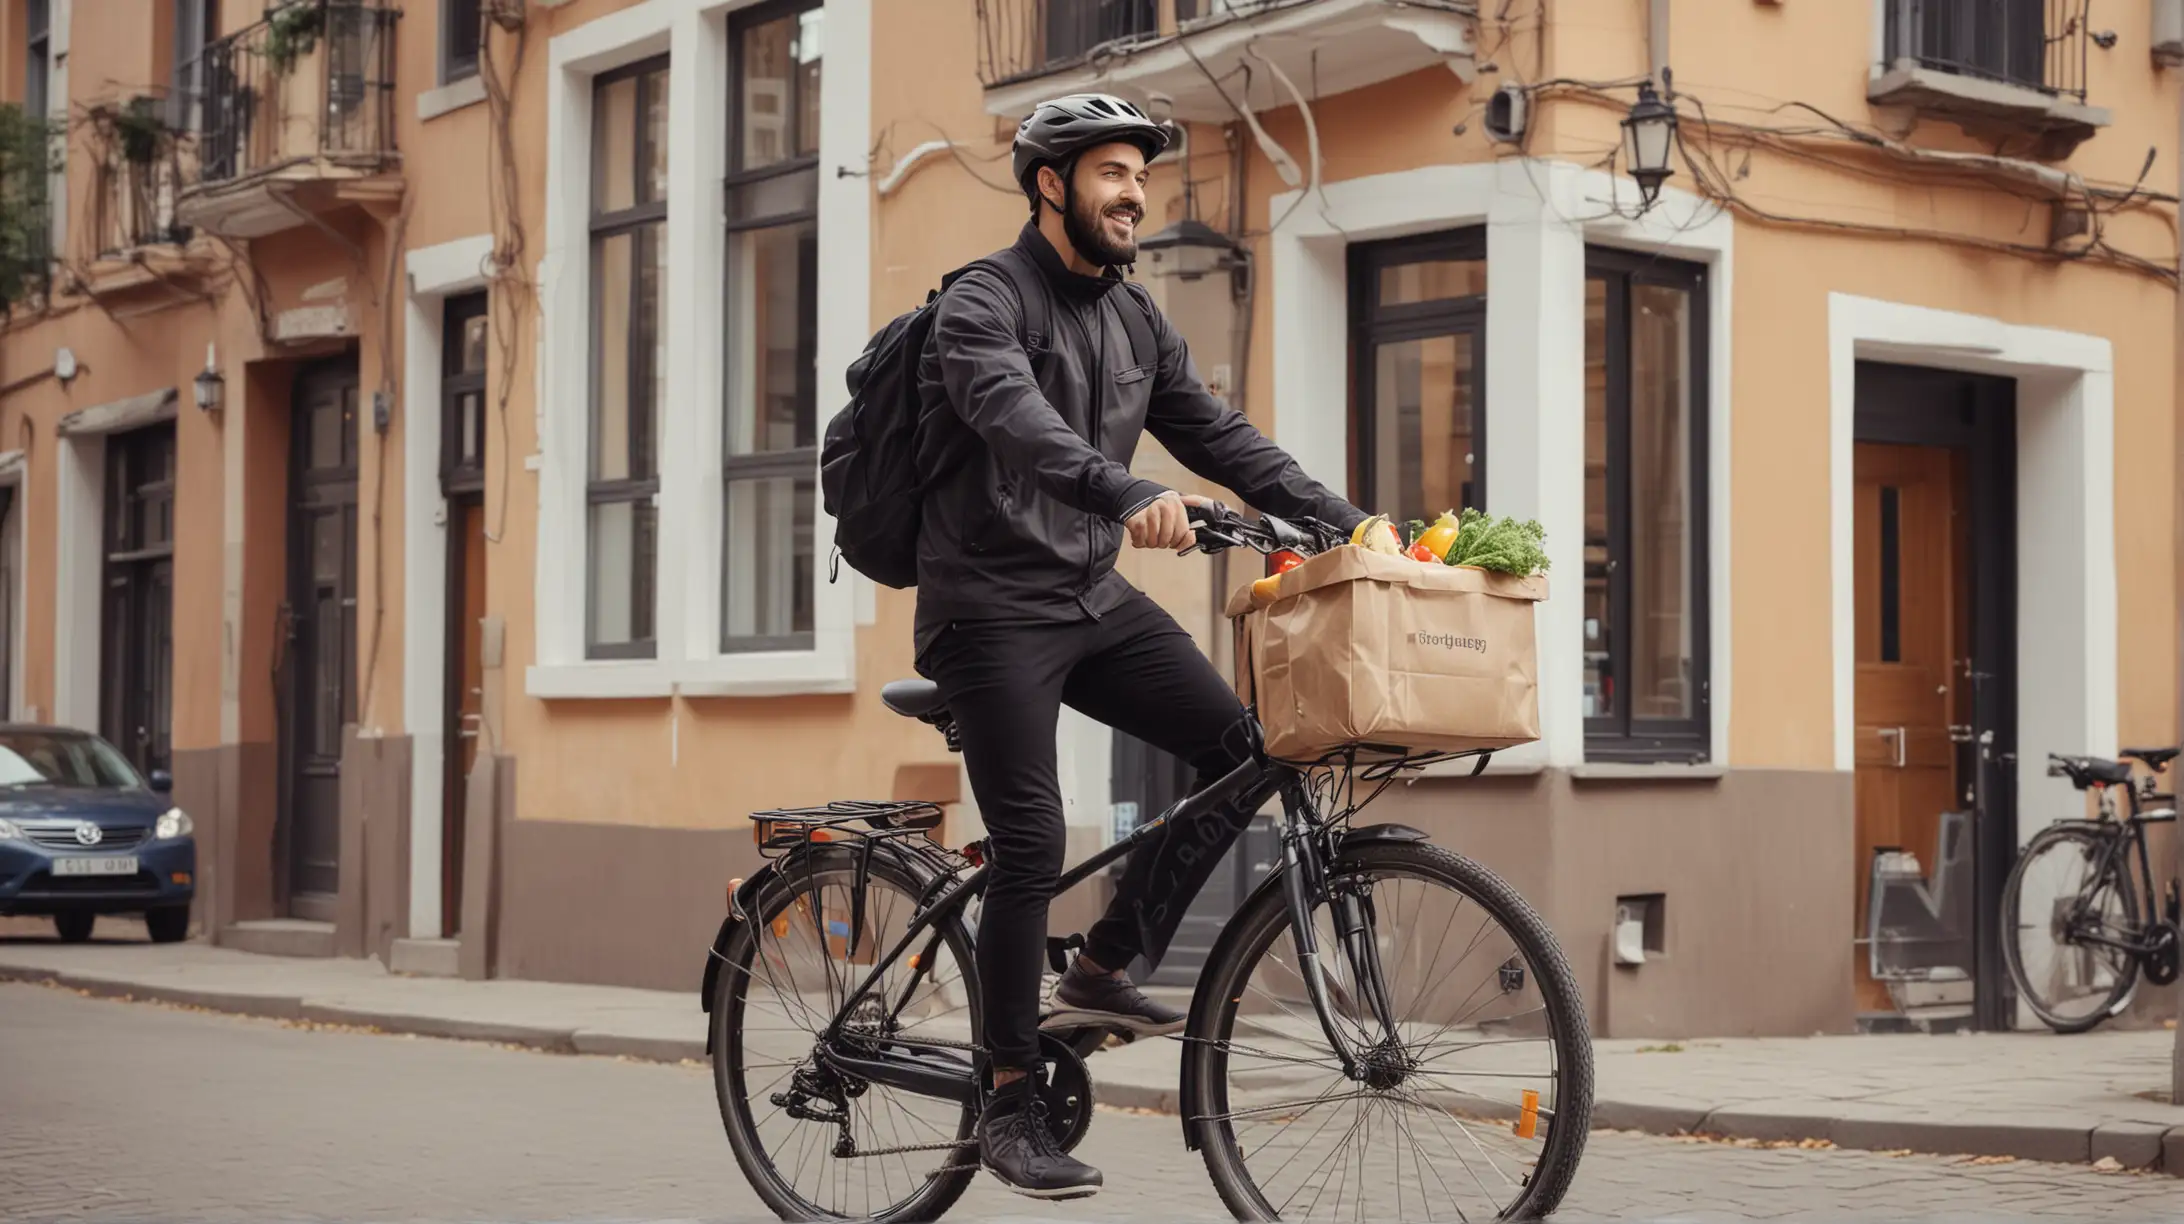 Modern Town Food Delivery Rider on Bicycle Delivering Orders